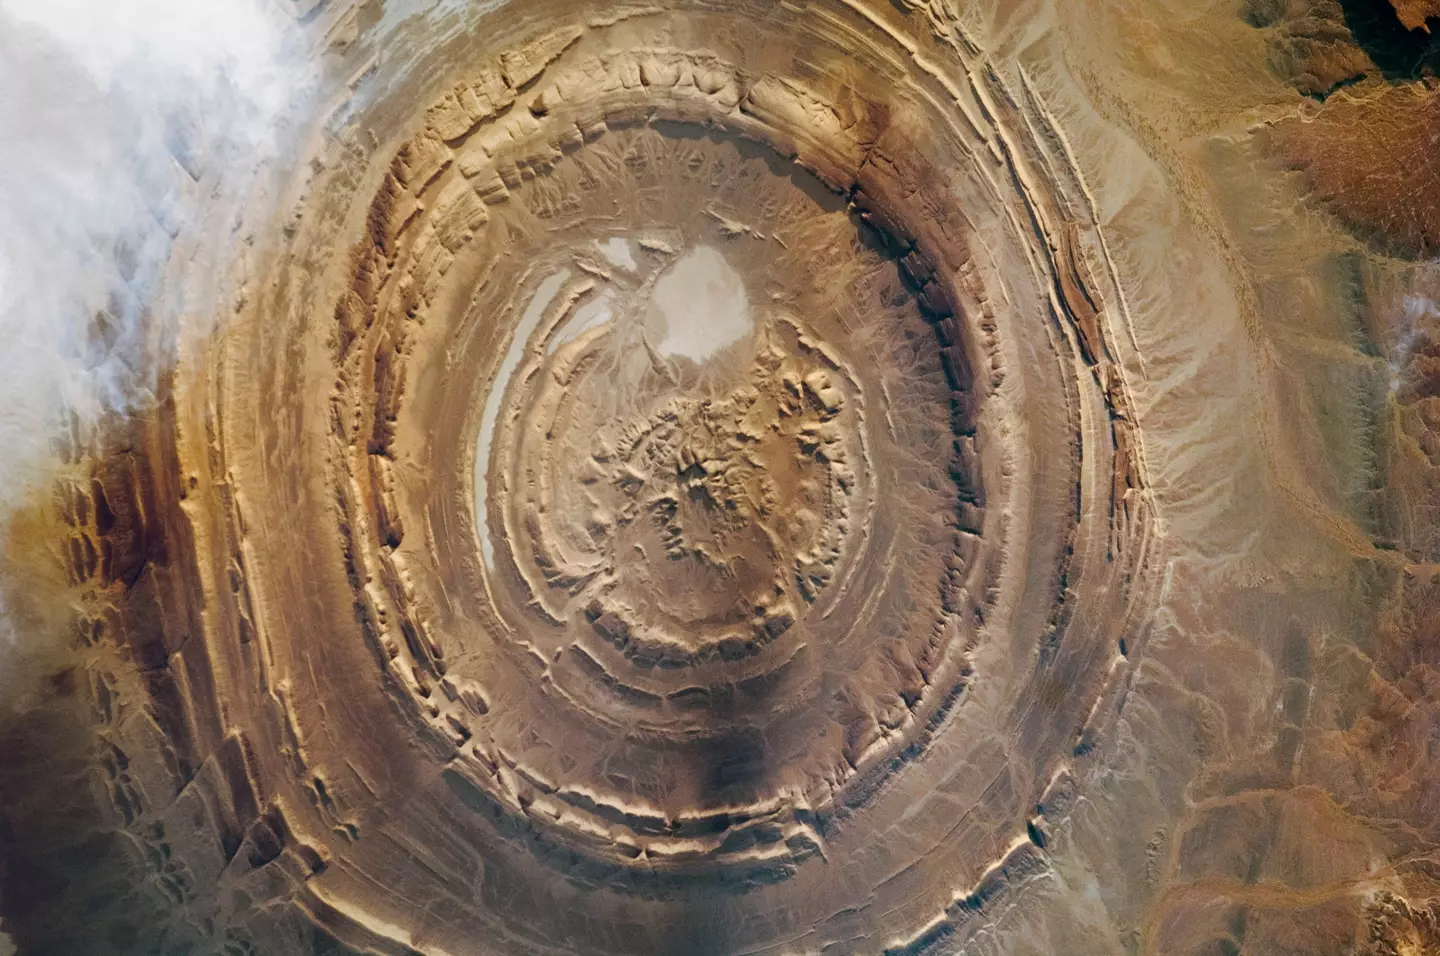 The Eye of the Sahara, also known as the Richat Structure, resides in Mauritania.